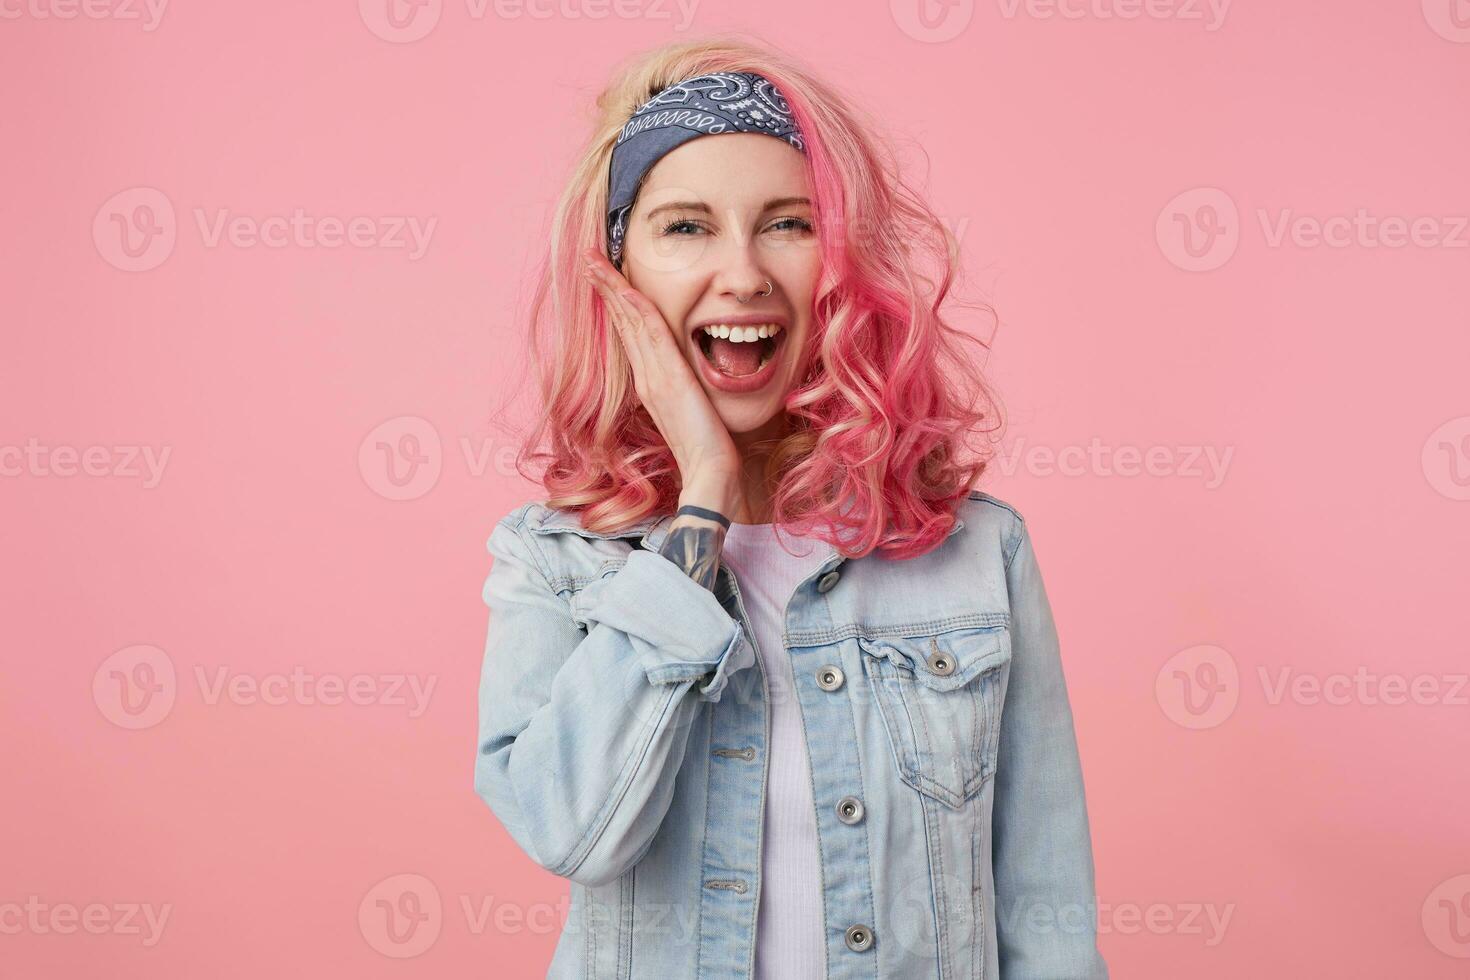 Portrait of happy cute girl with pink hair and tattooed hand,flattered by the compliment, laughs and touches the cheek standing over pink background, wearing a white t-shirt and denim jacket. photo